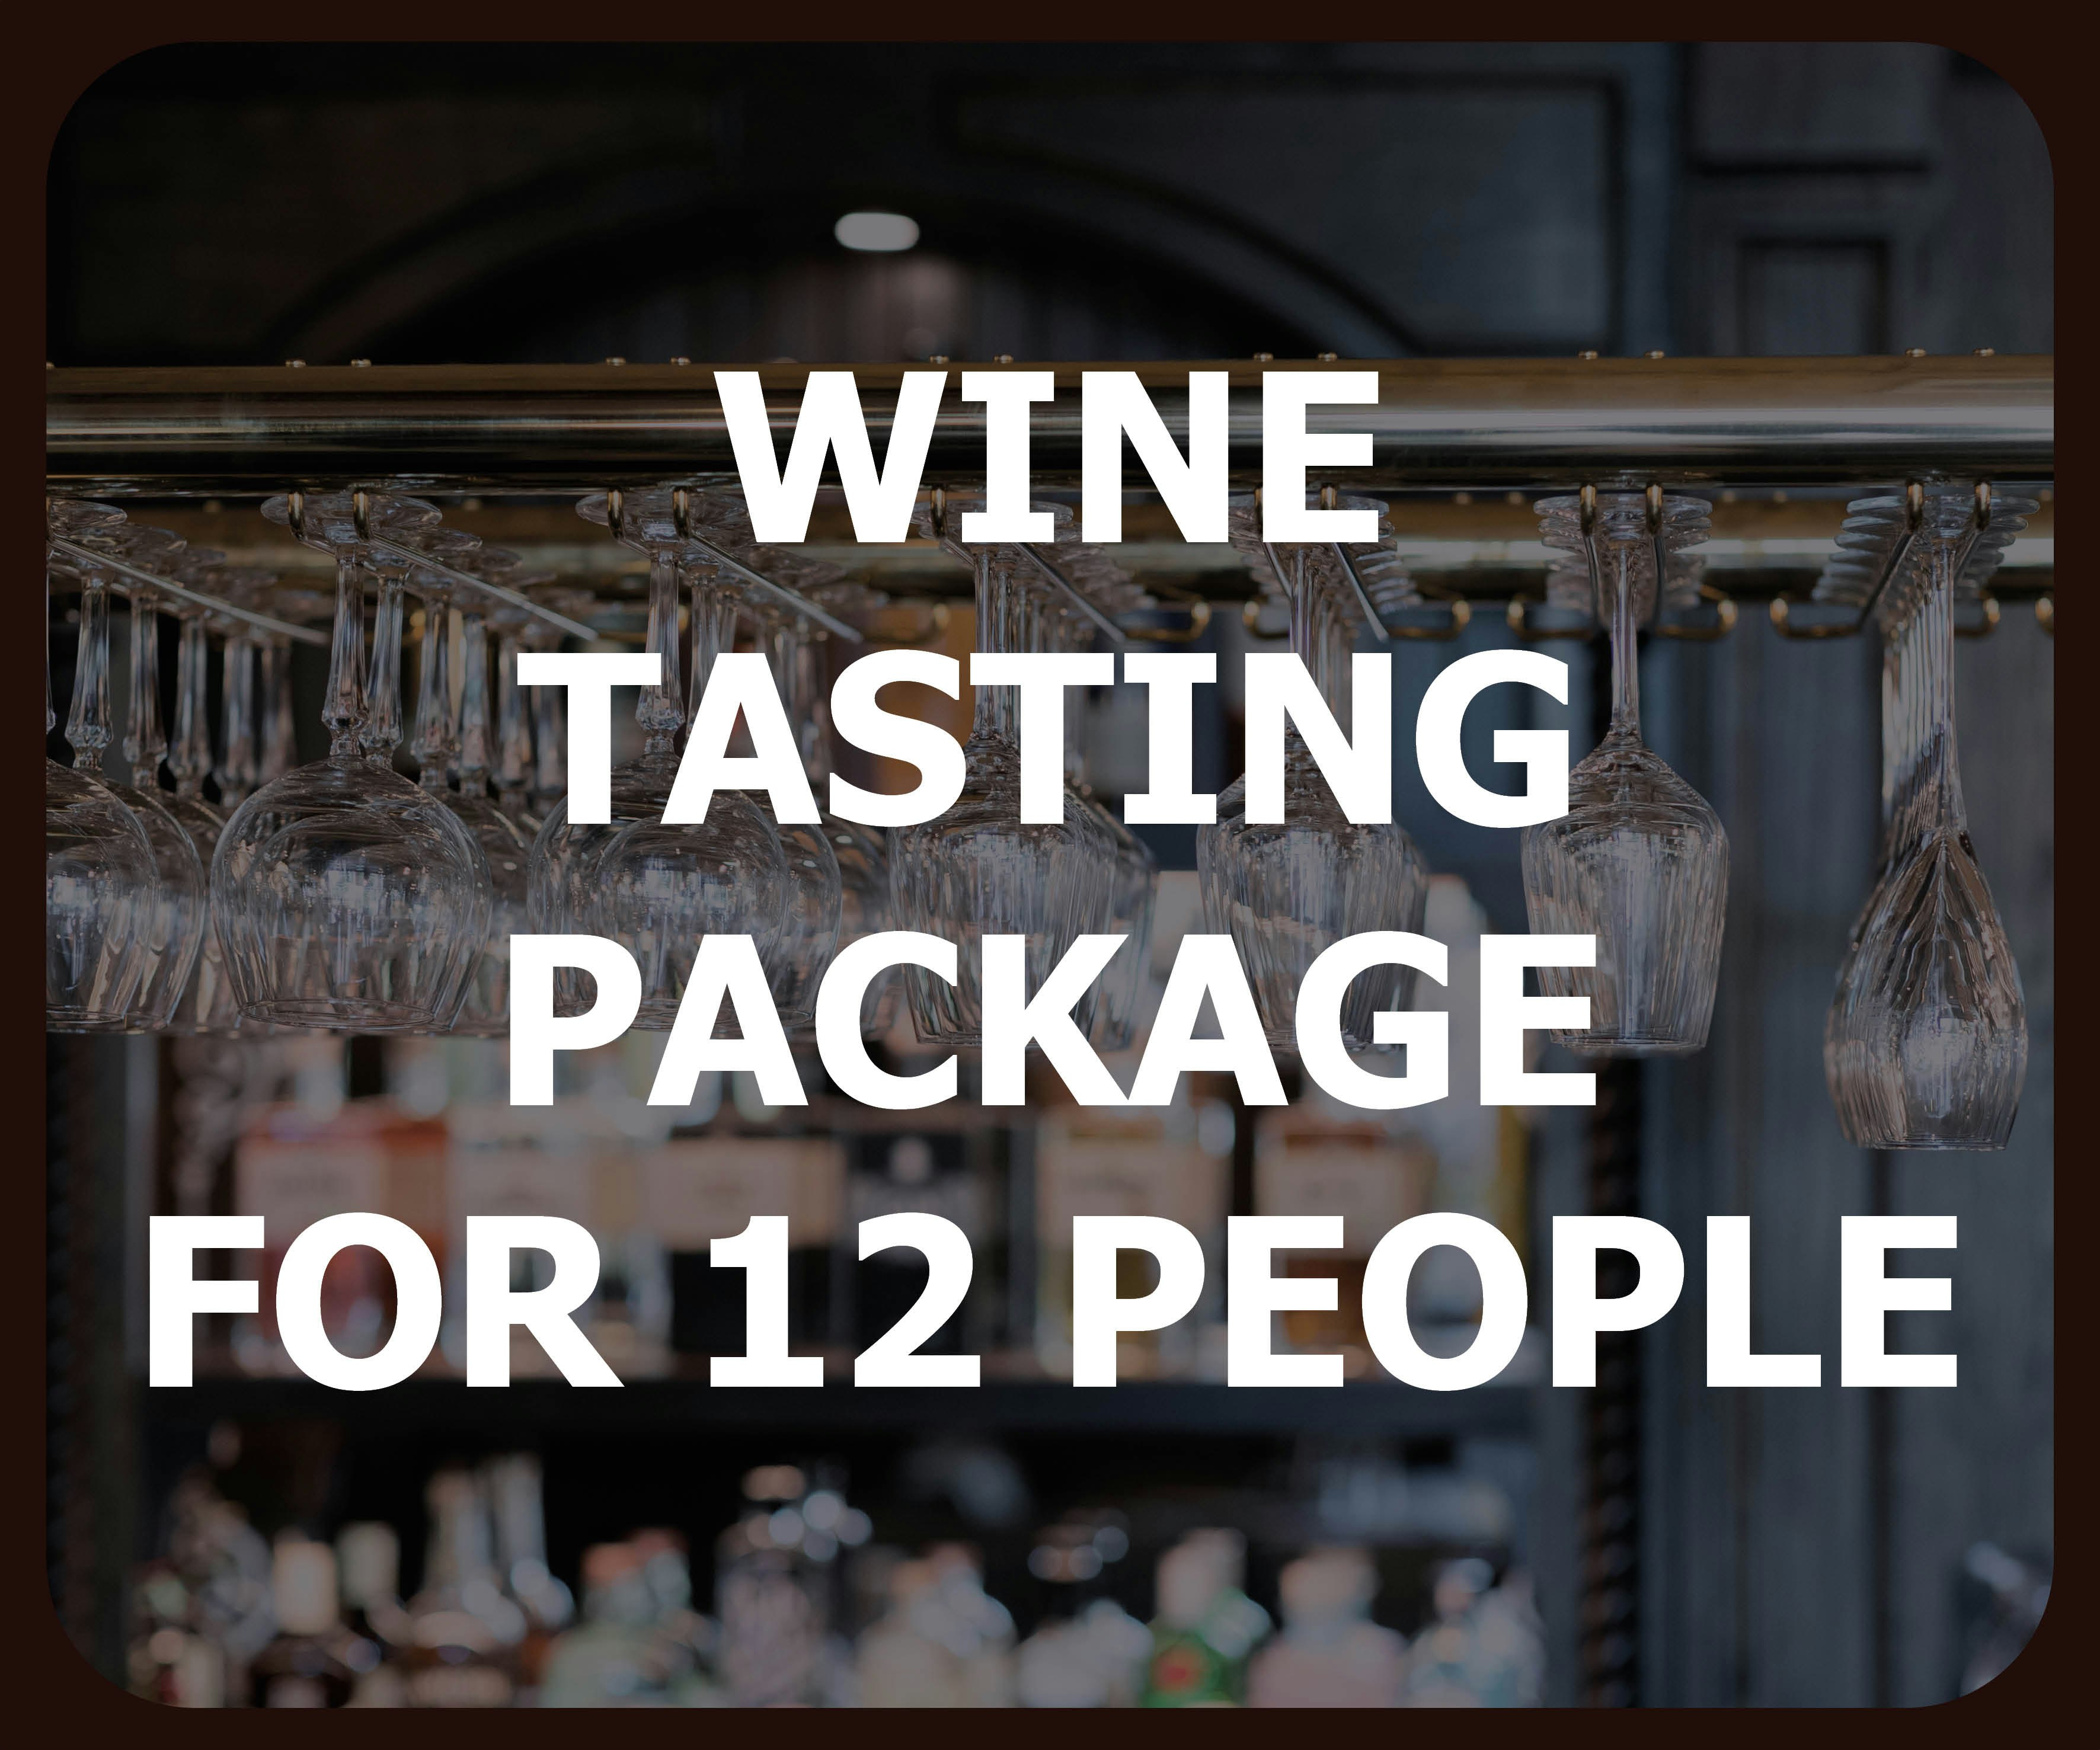 Wine seminar at the Willow Yard Pub - package for 12 people